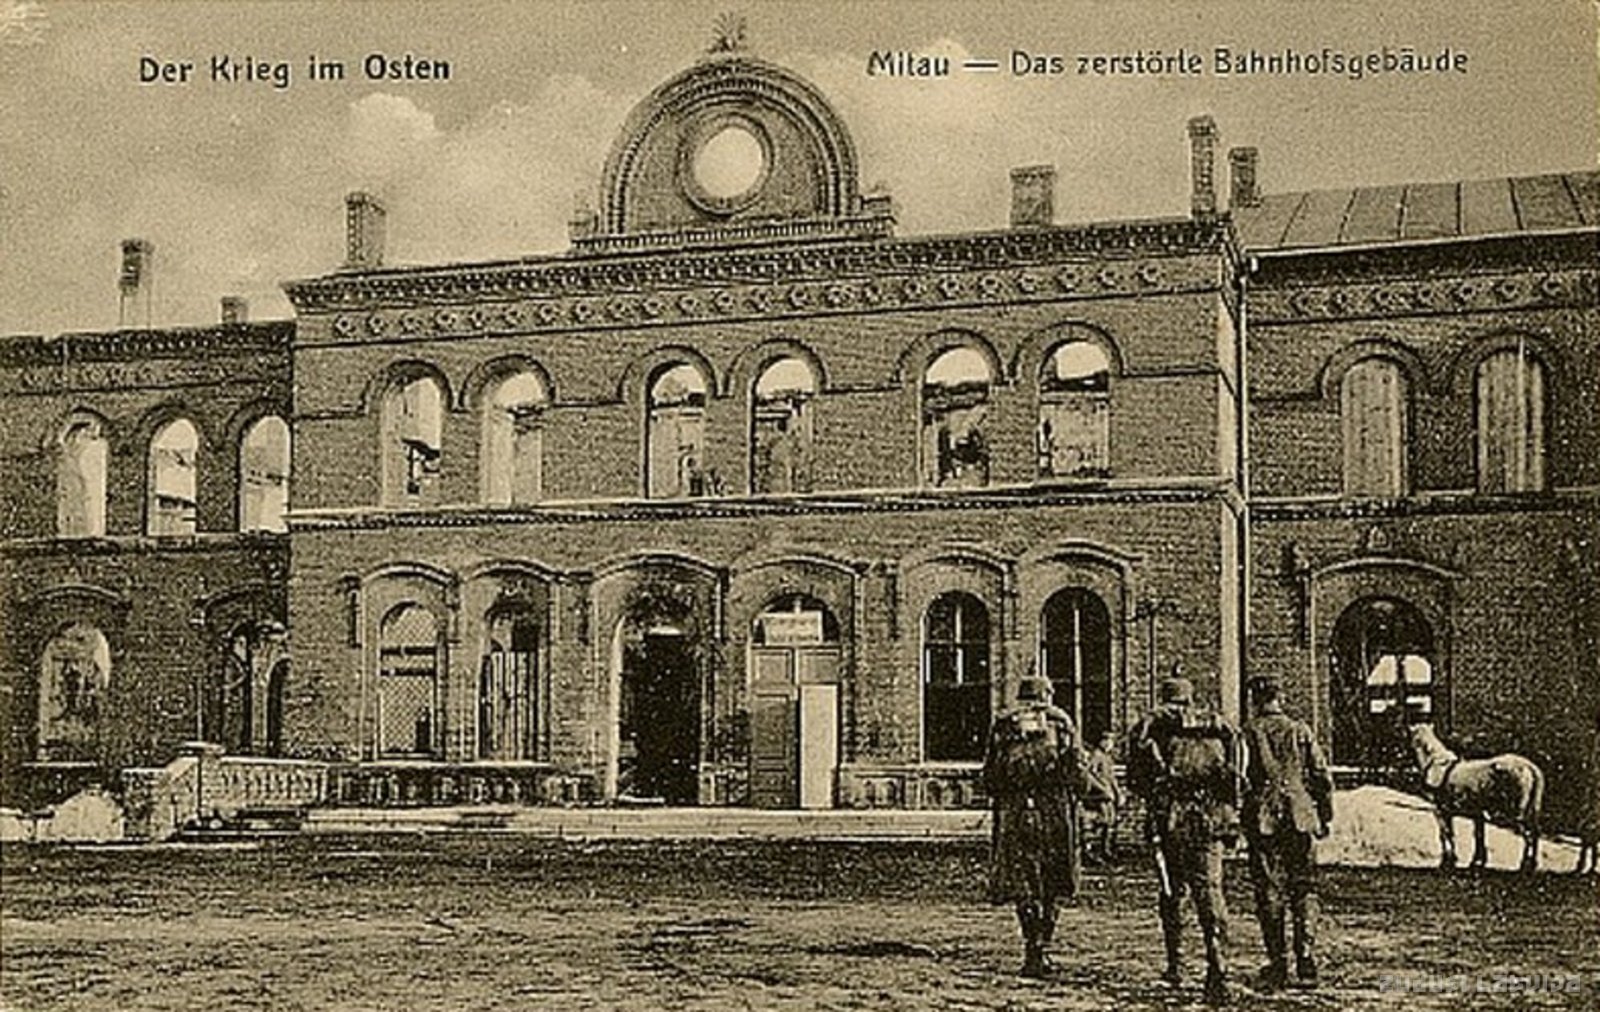 The war in the East. Mitau - The cracked railway station building, Jelgava. Damaged railway station building